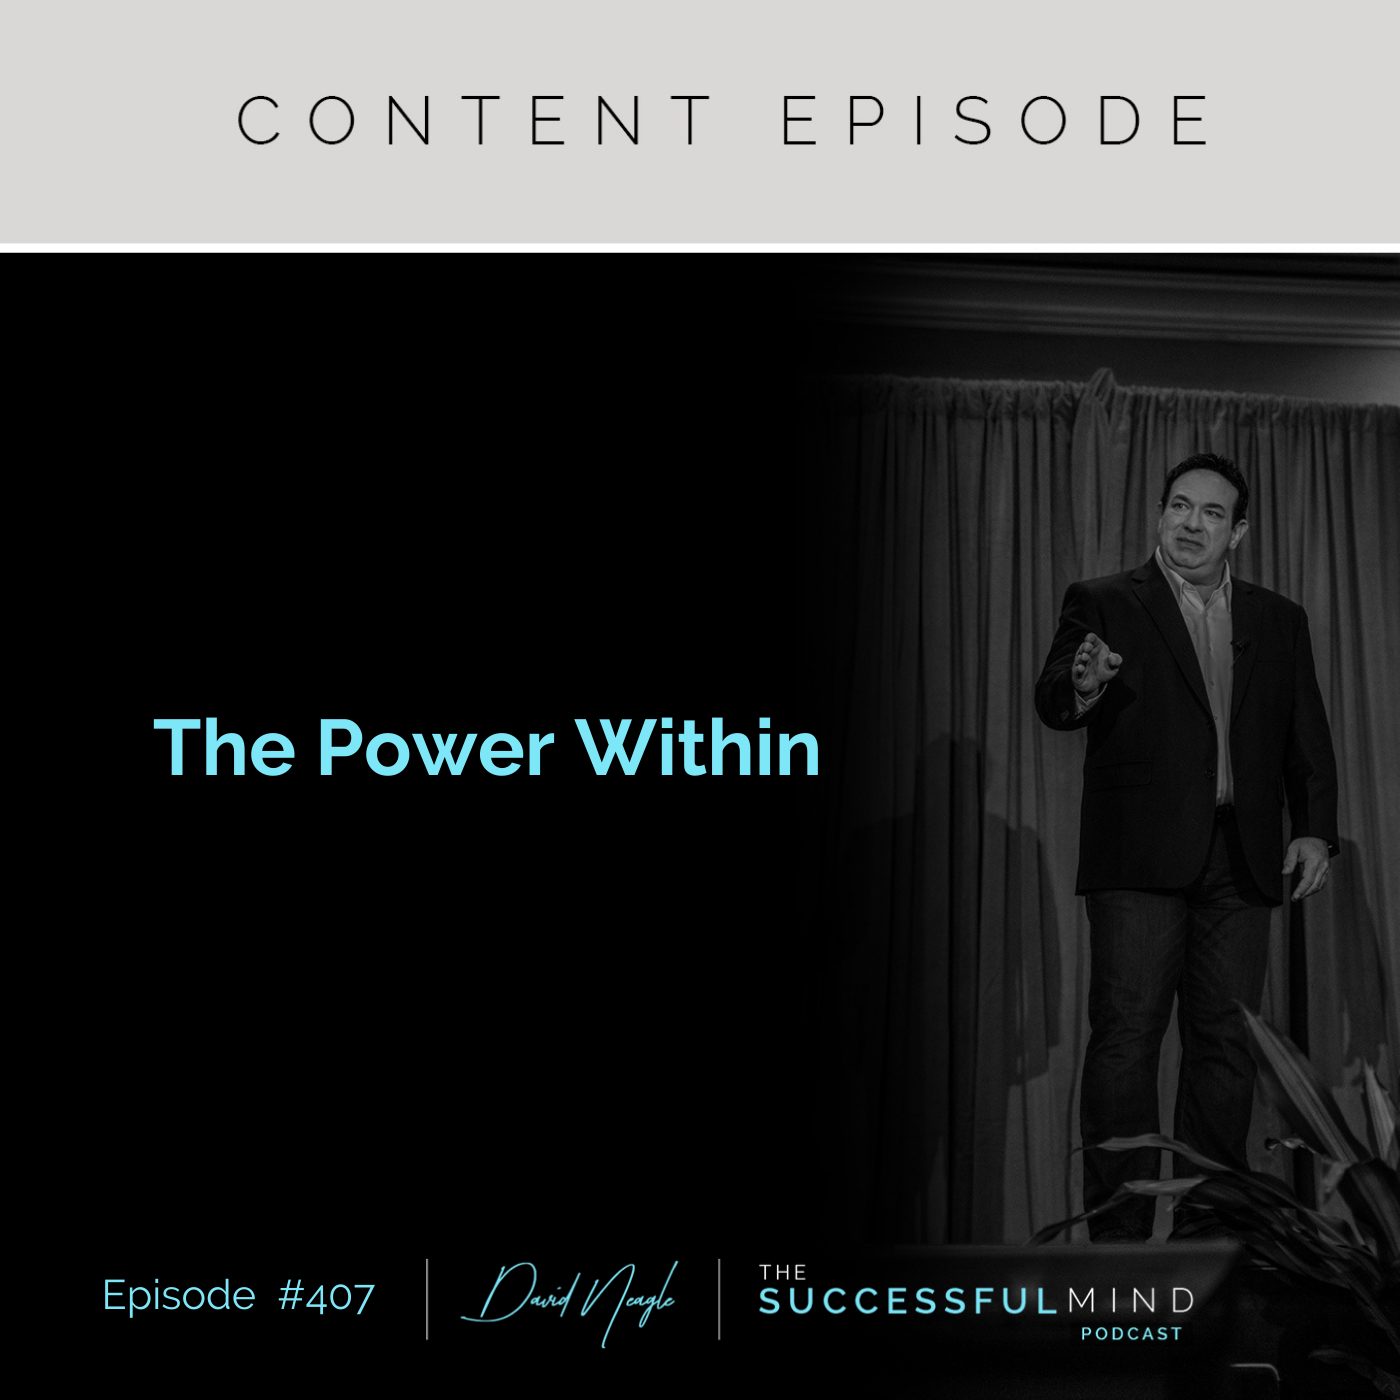 The Successful Mind Podcast - Episode 407 - The Power Within